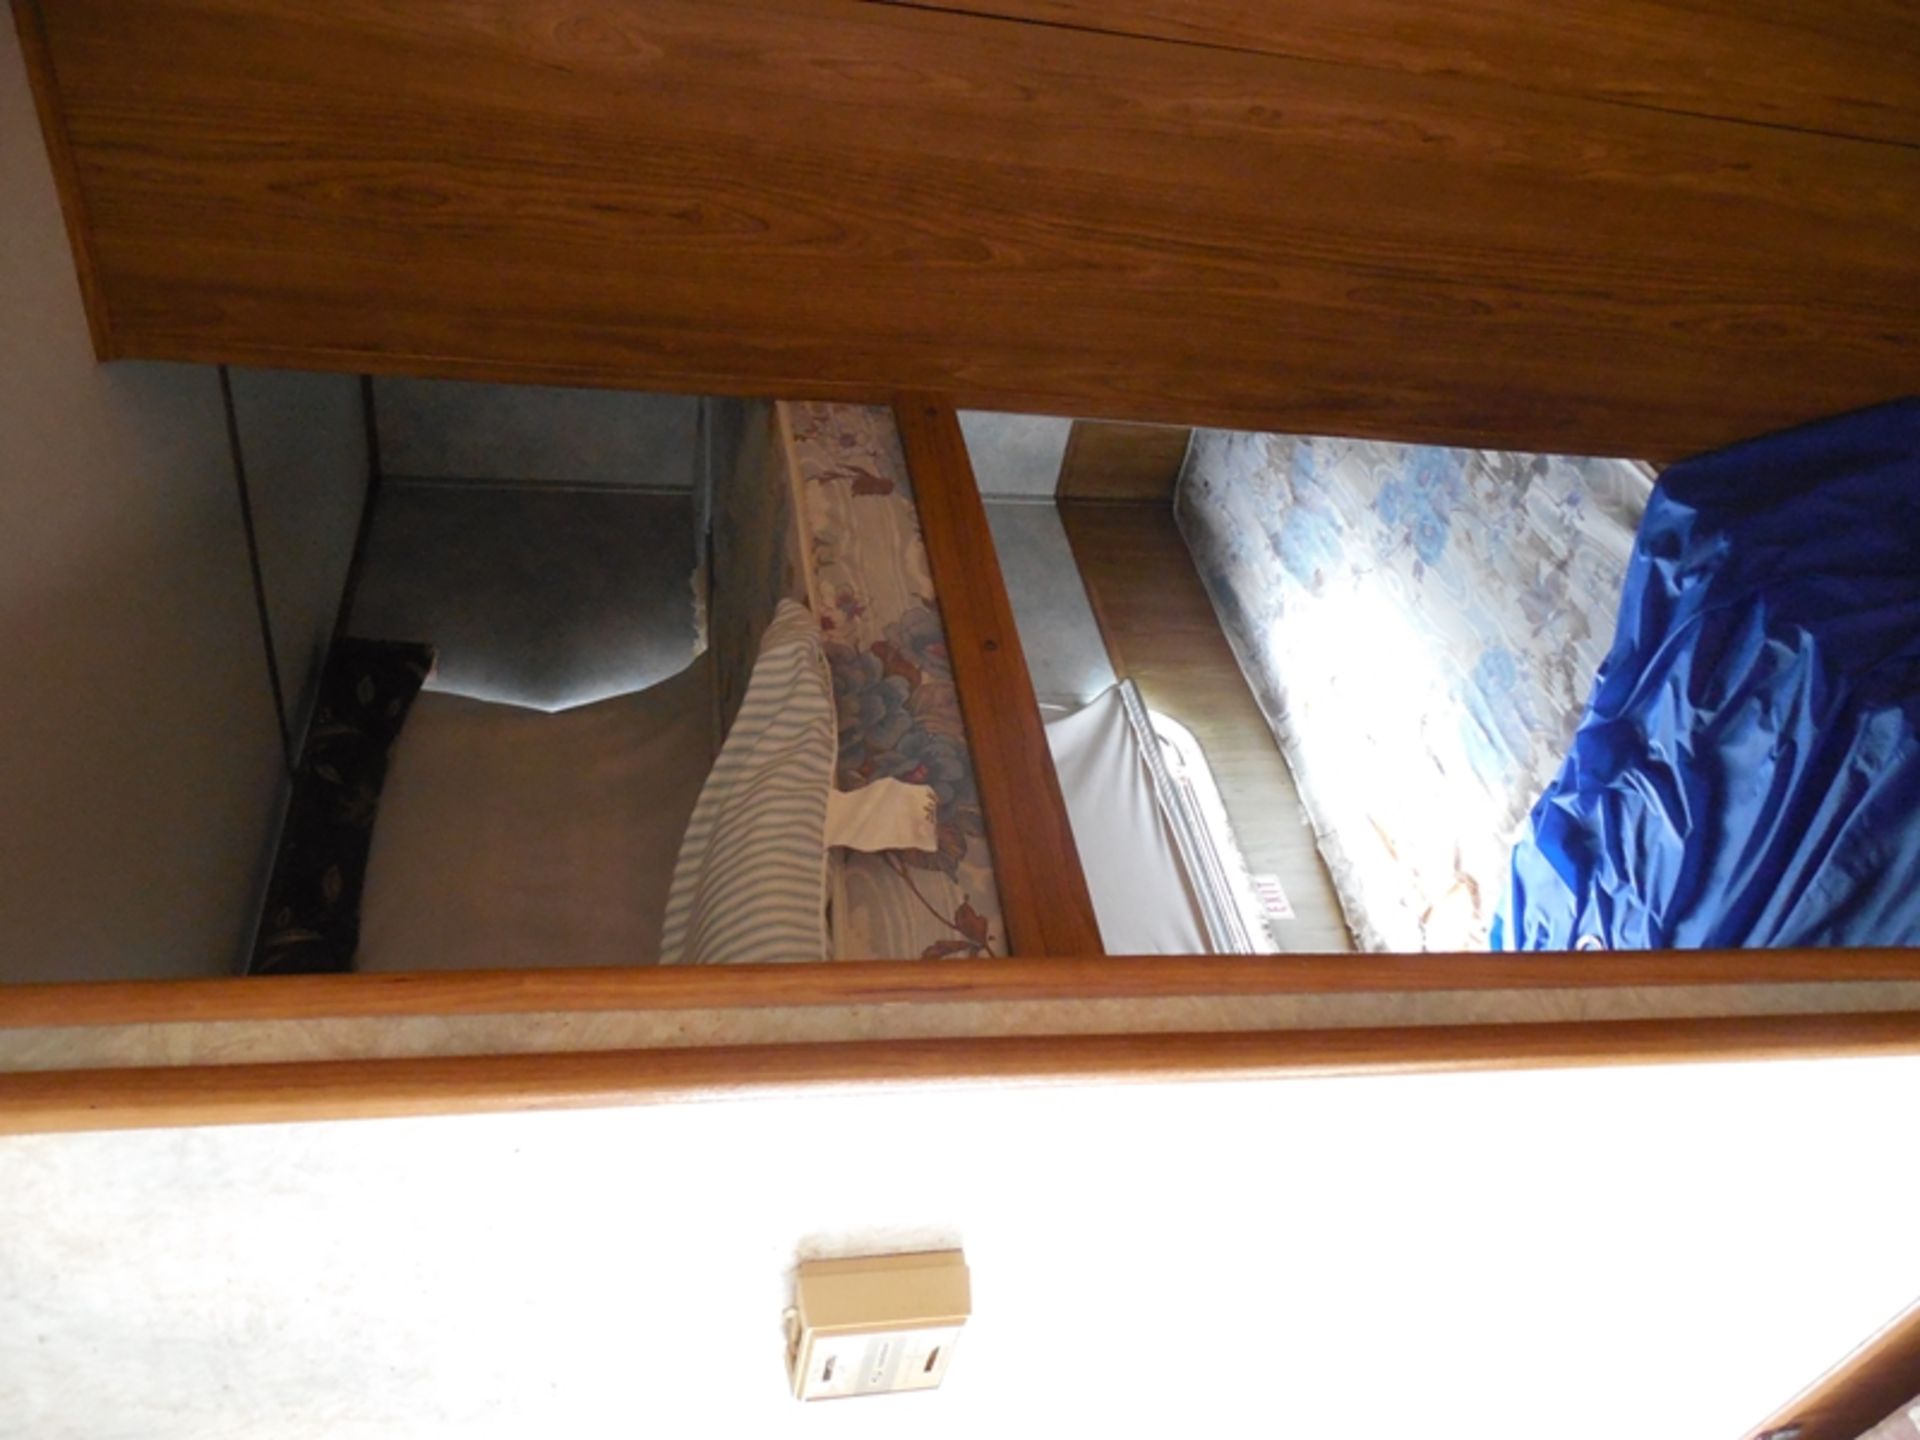 1995 Gulfstream 27' camper vin# 1NLOTP24S1023544 Not used in several years - Image 7 of 7